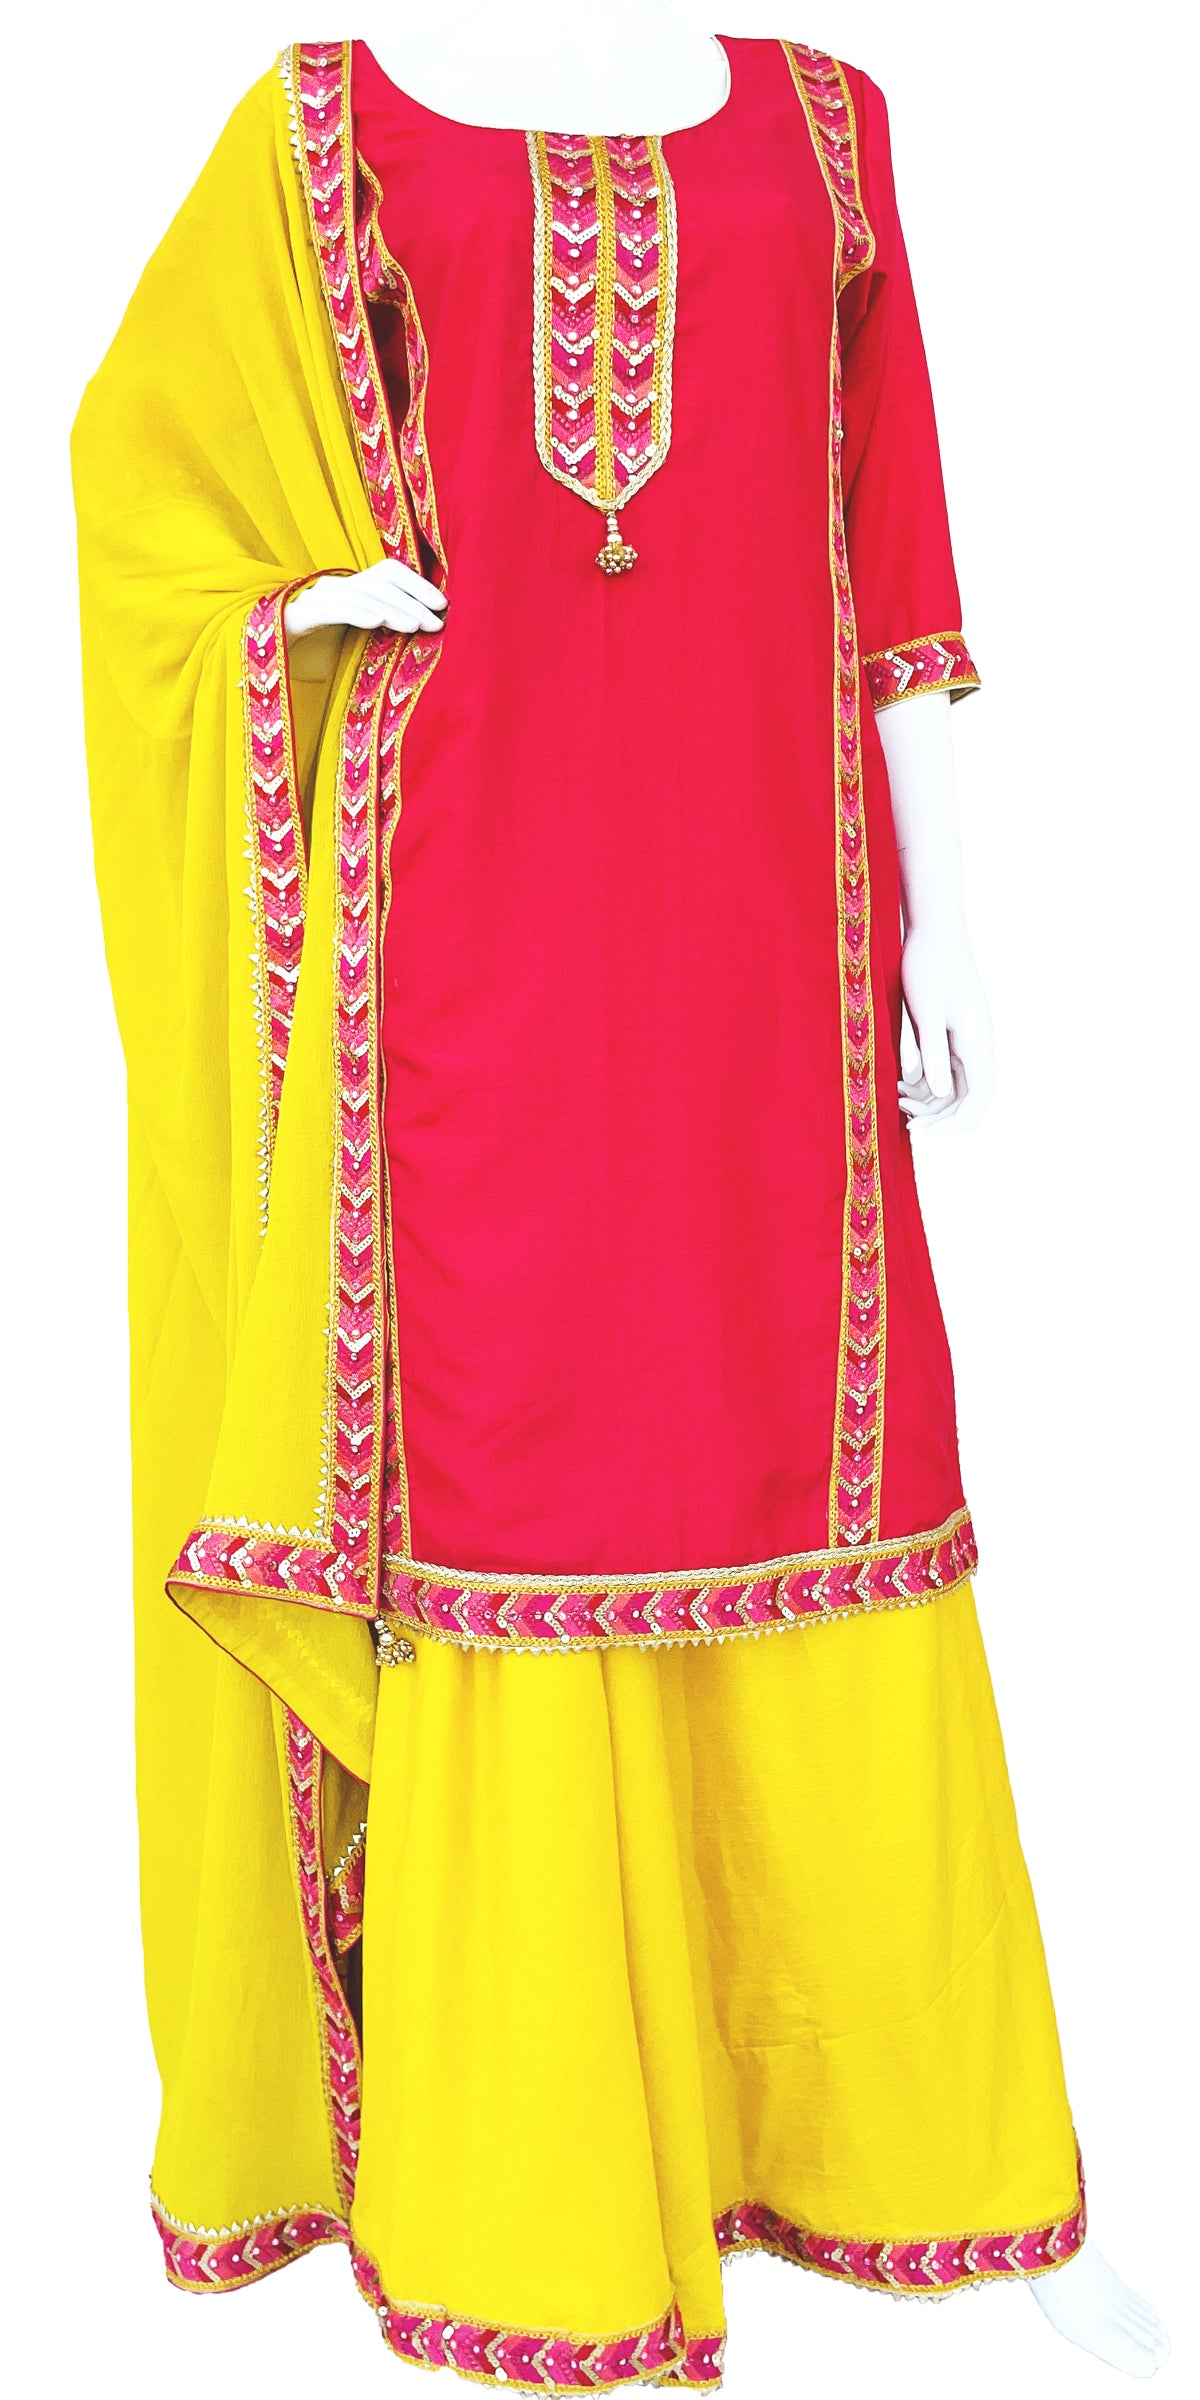 Pink Silk Palazzo Suit, Yellow Punjabi Palazzo Suit, Yellow Wedding wear, Ready to wear, Cost effective Palazzo Suit, Palazzo with Dupatta and Long Top, Fancy Palazzo suit, Palazzo suit for pooja, mahurat pooja dress, Dress for temple visit